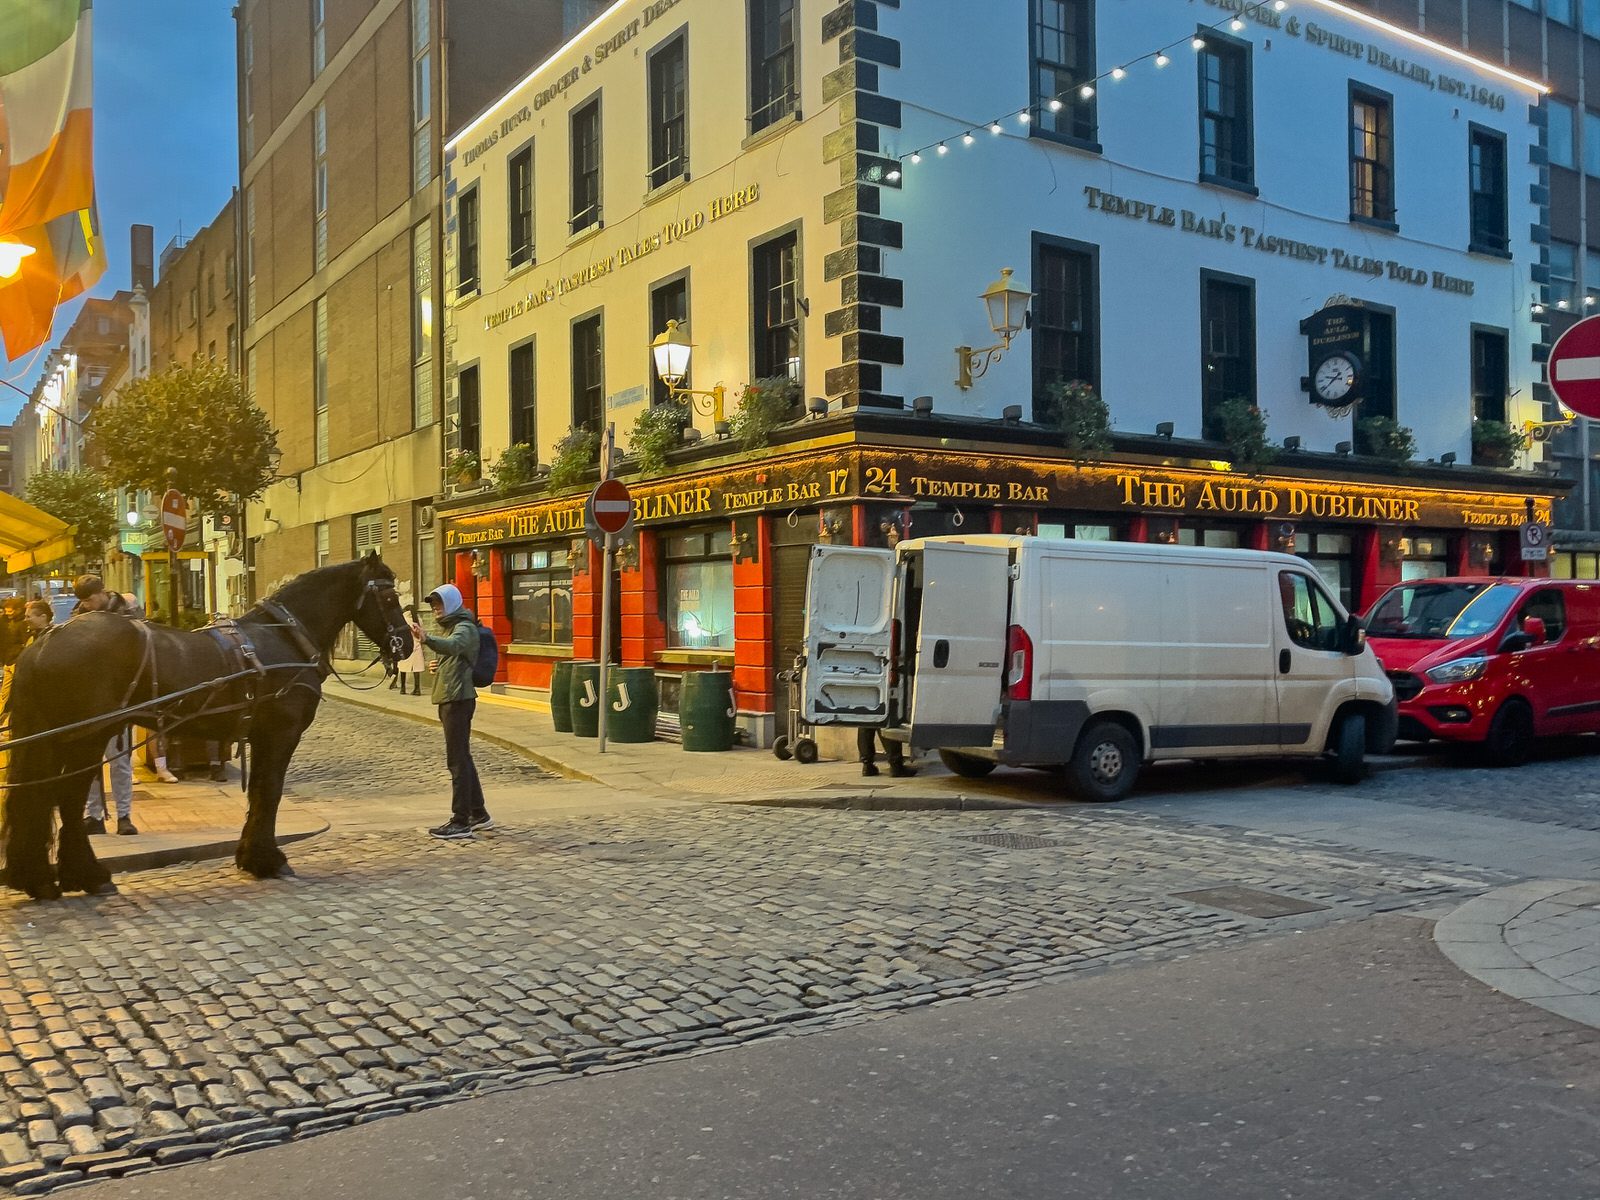 I VISITED TEMPLE BAR TODAY [AS NIGHTFALL WAS APPROACHING]-225334-1